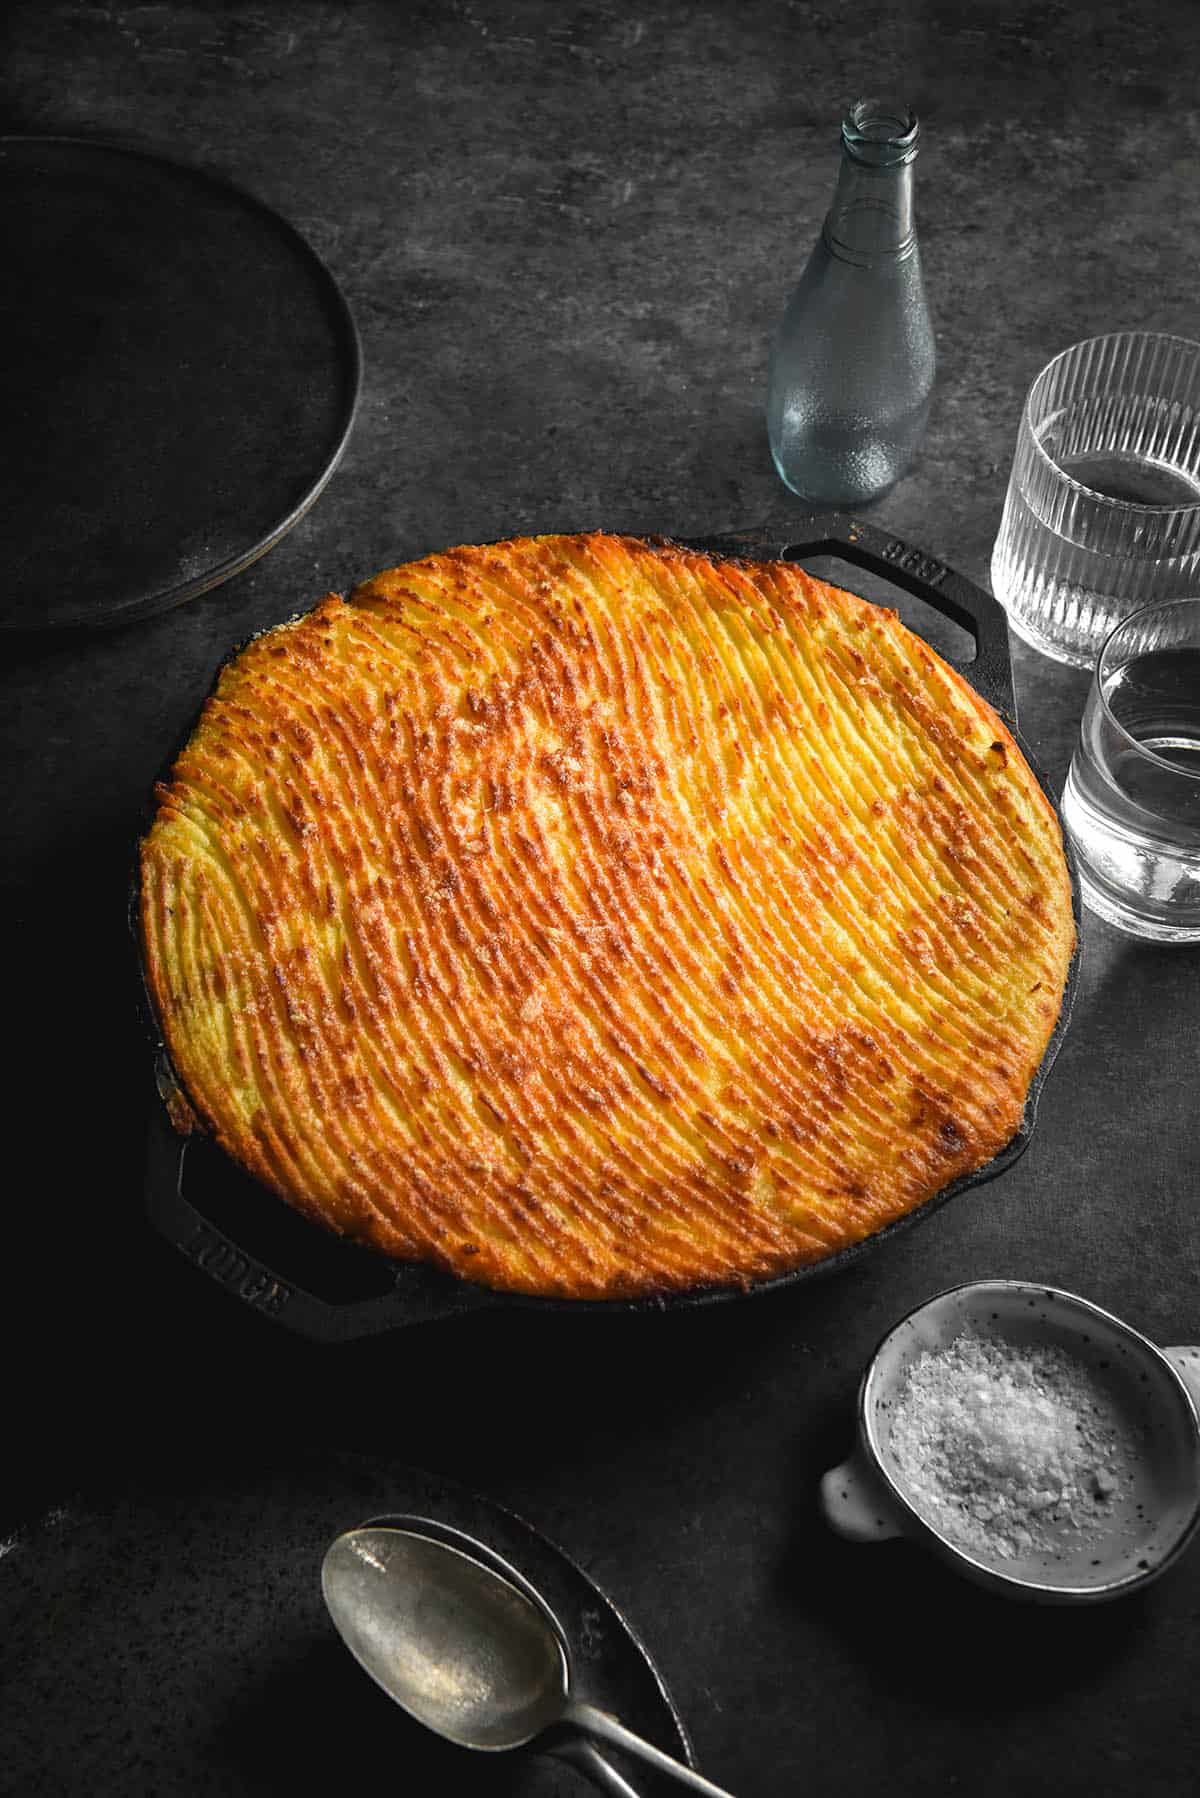 An aerial view of a FODMAP friendly vegetarian Shepherd's Pie in a skillet. The top of the Shepherd's Pie has a wavy fork pattern and is golden brown. The skillet sits atop a dark grey backdrop and is surrounded by spoons, plates, a salt dish and water glasses